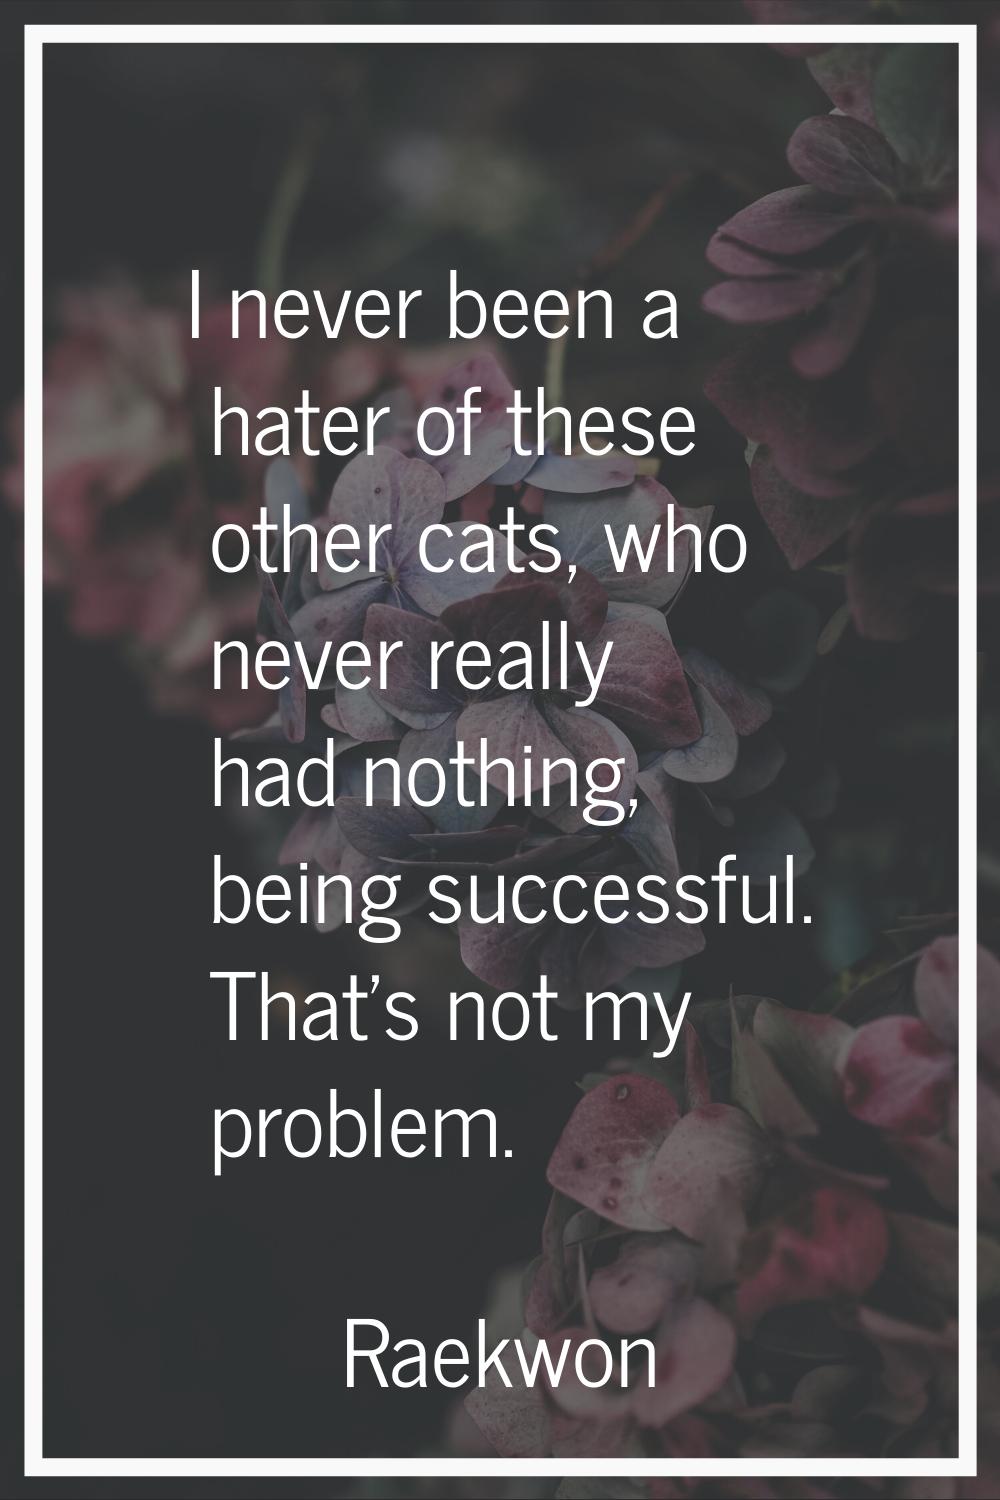 I never been a hater of these other cats, who never really had nothing, being successful. That's no